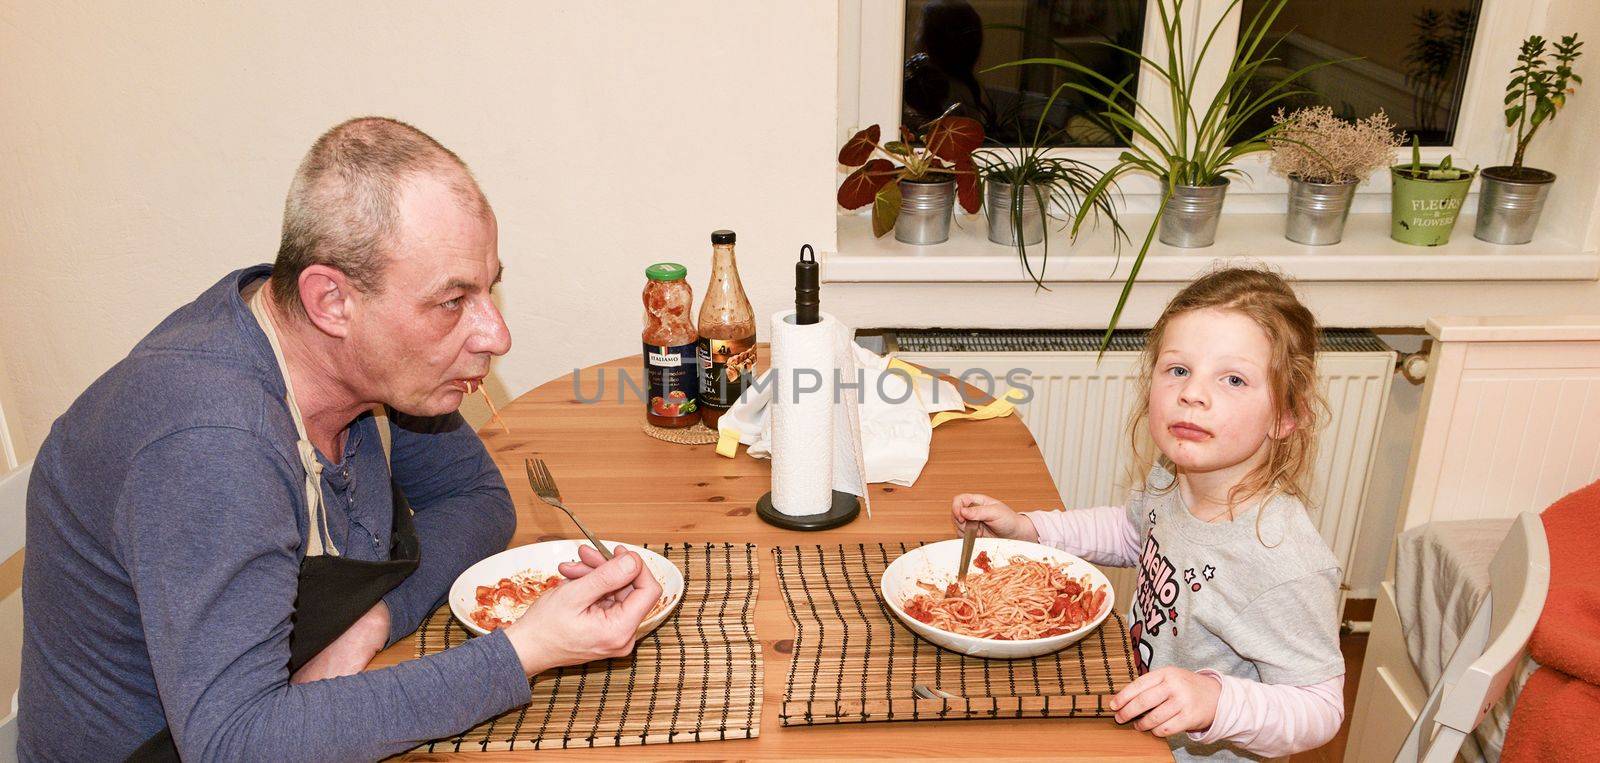 Daughter and father in the kitchen eating spaghetti for dinner by roman_nerud